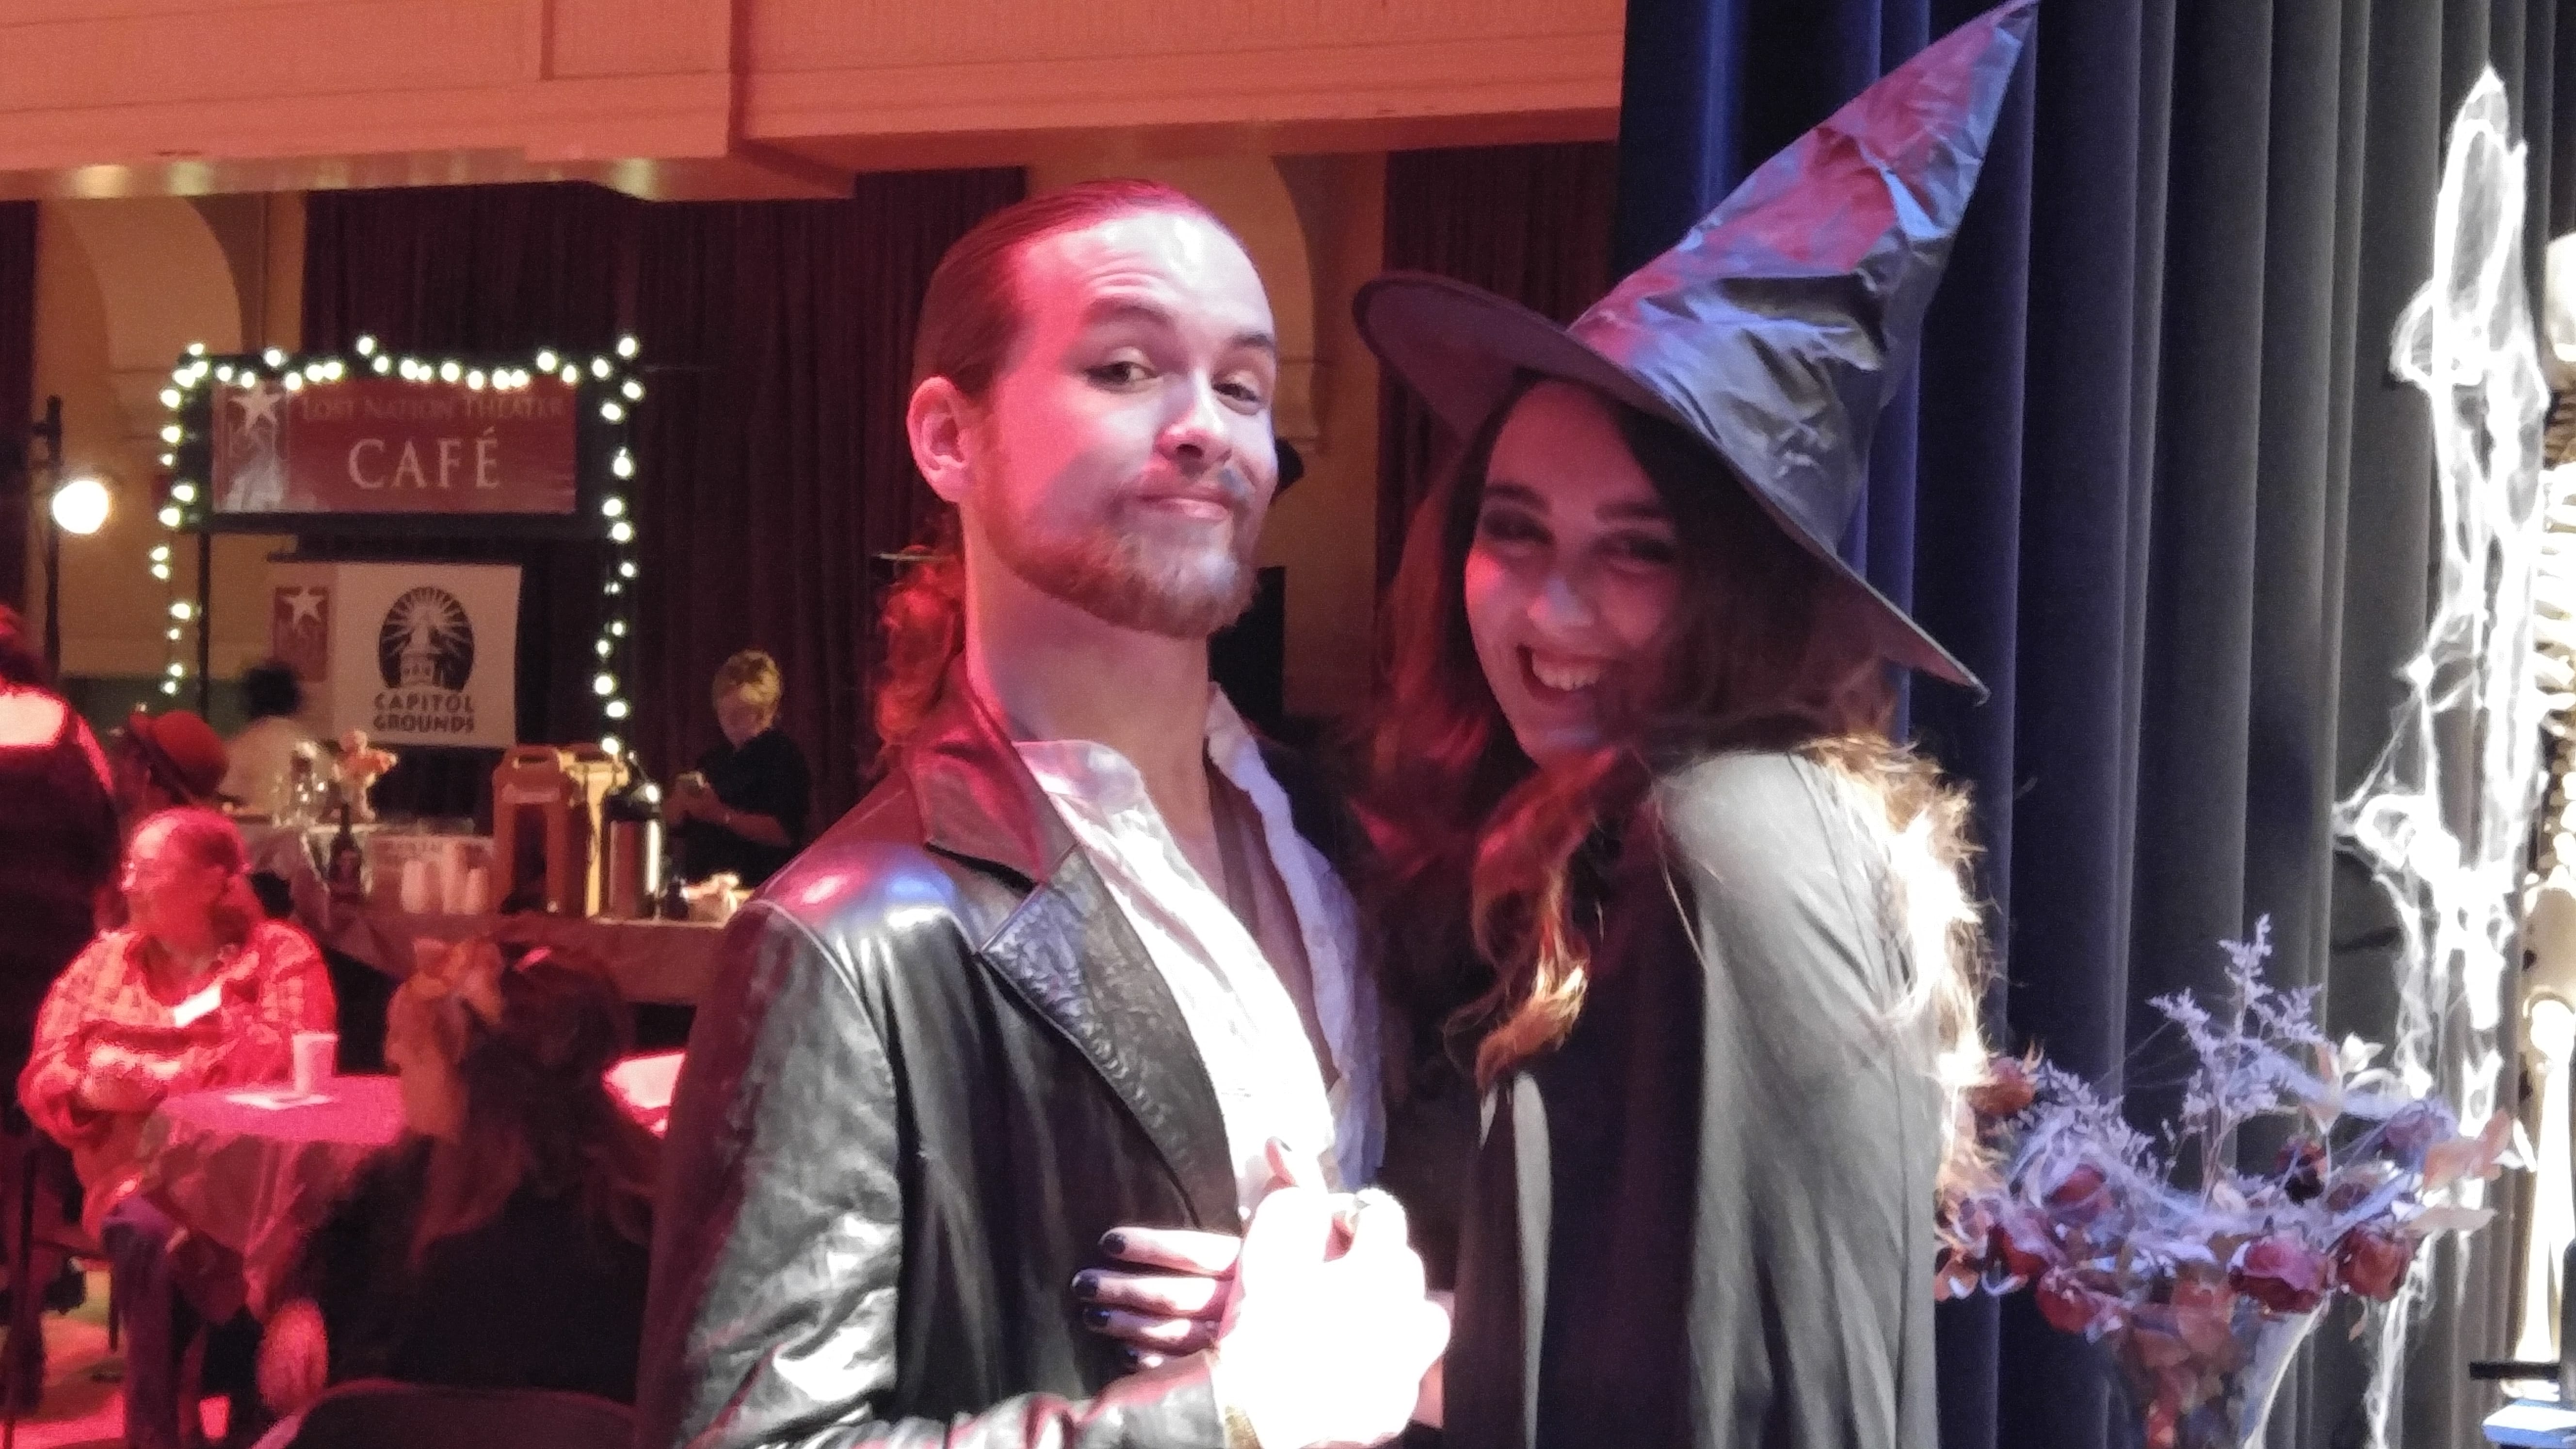 Pirates and Witches at Poe